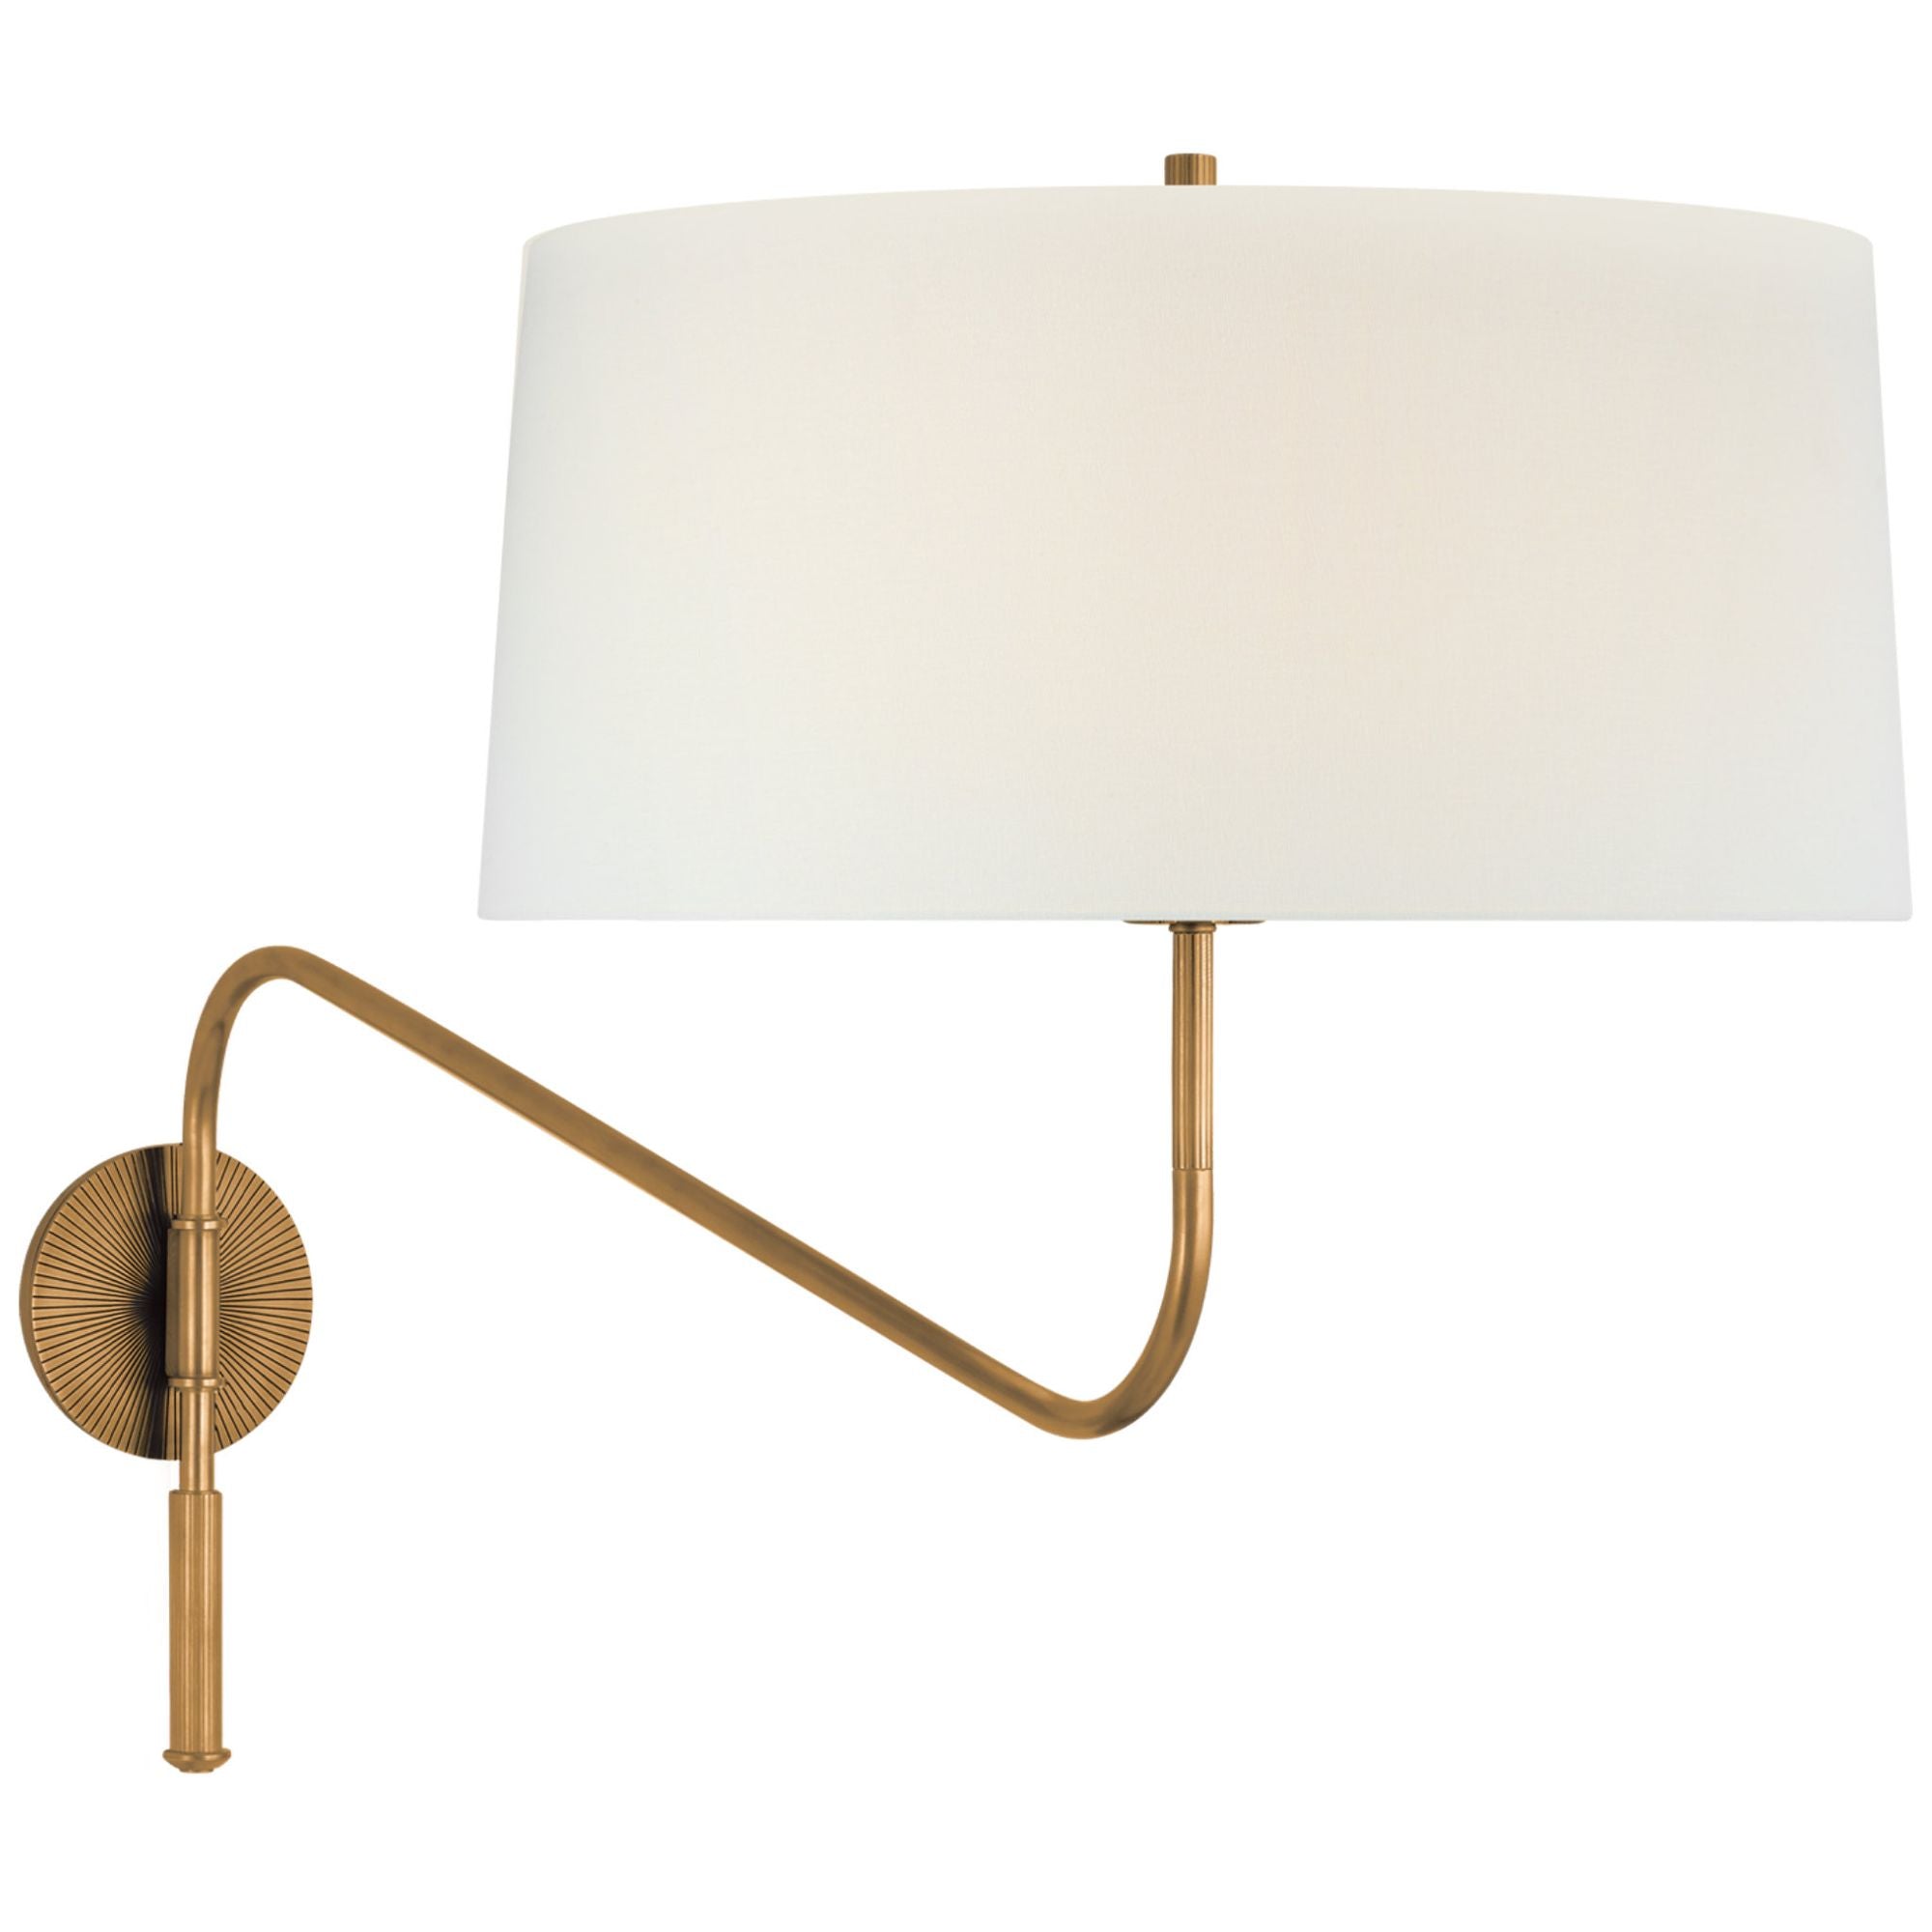 Thomas O'Brien Canto Grande Swinging Wall Light in Hand-Rubbed Antique Brass with Linen Shade